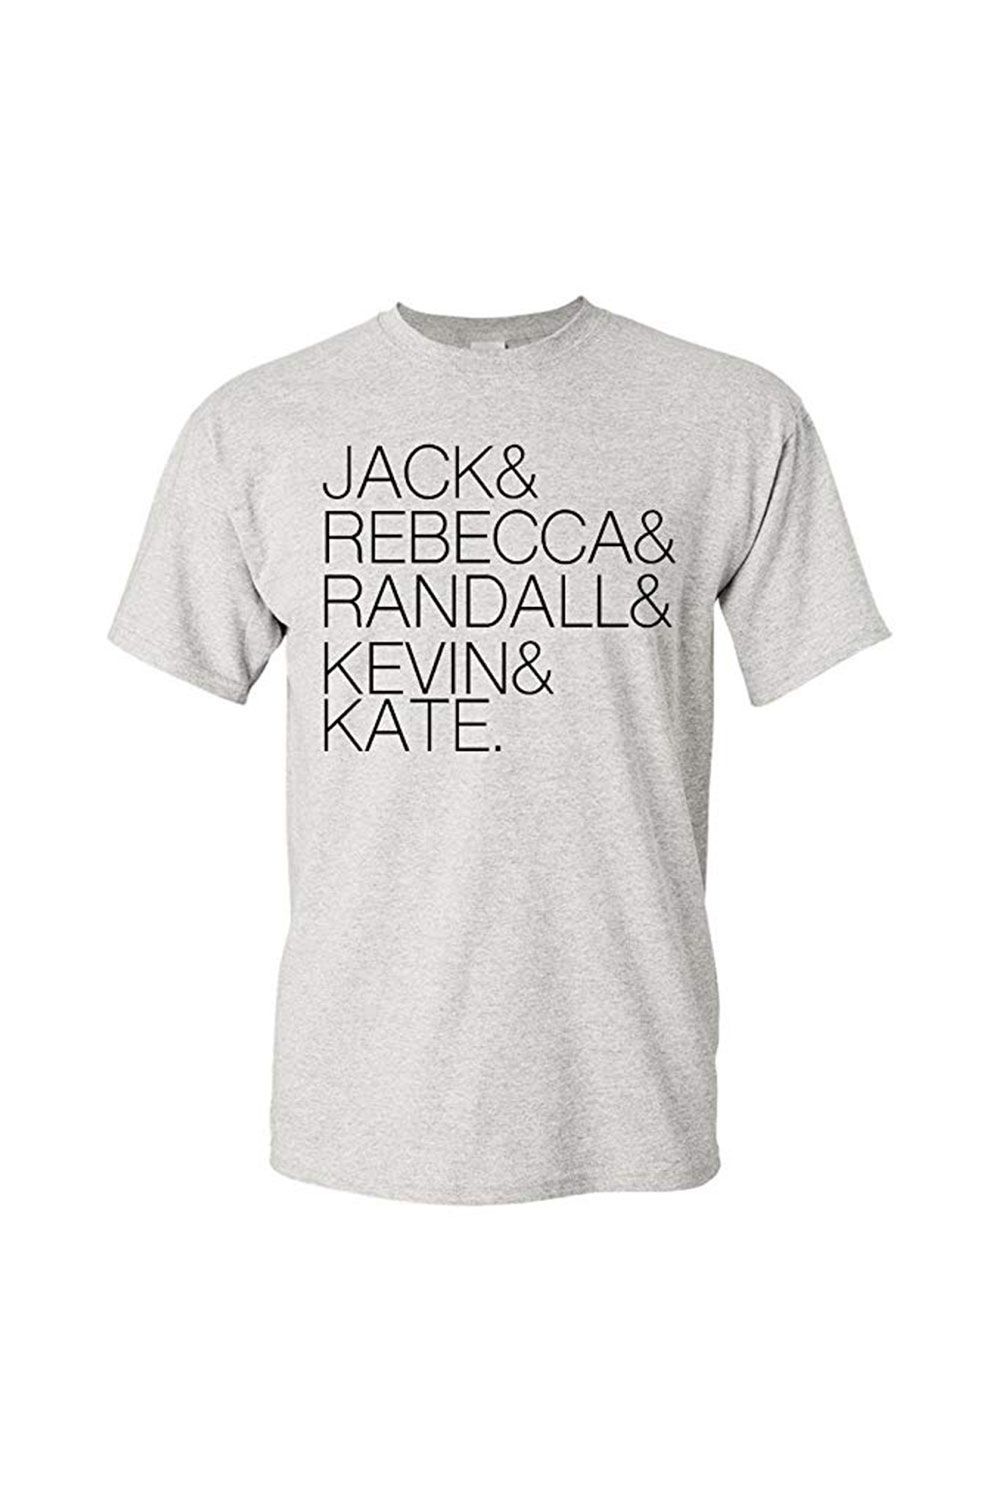 This Is Us "Squad Goals" T-Shirt